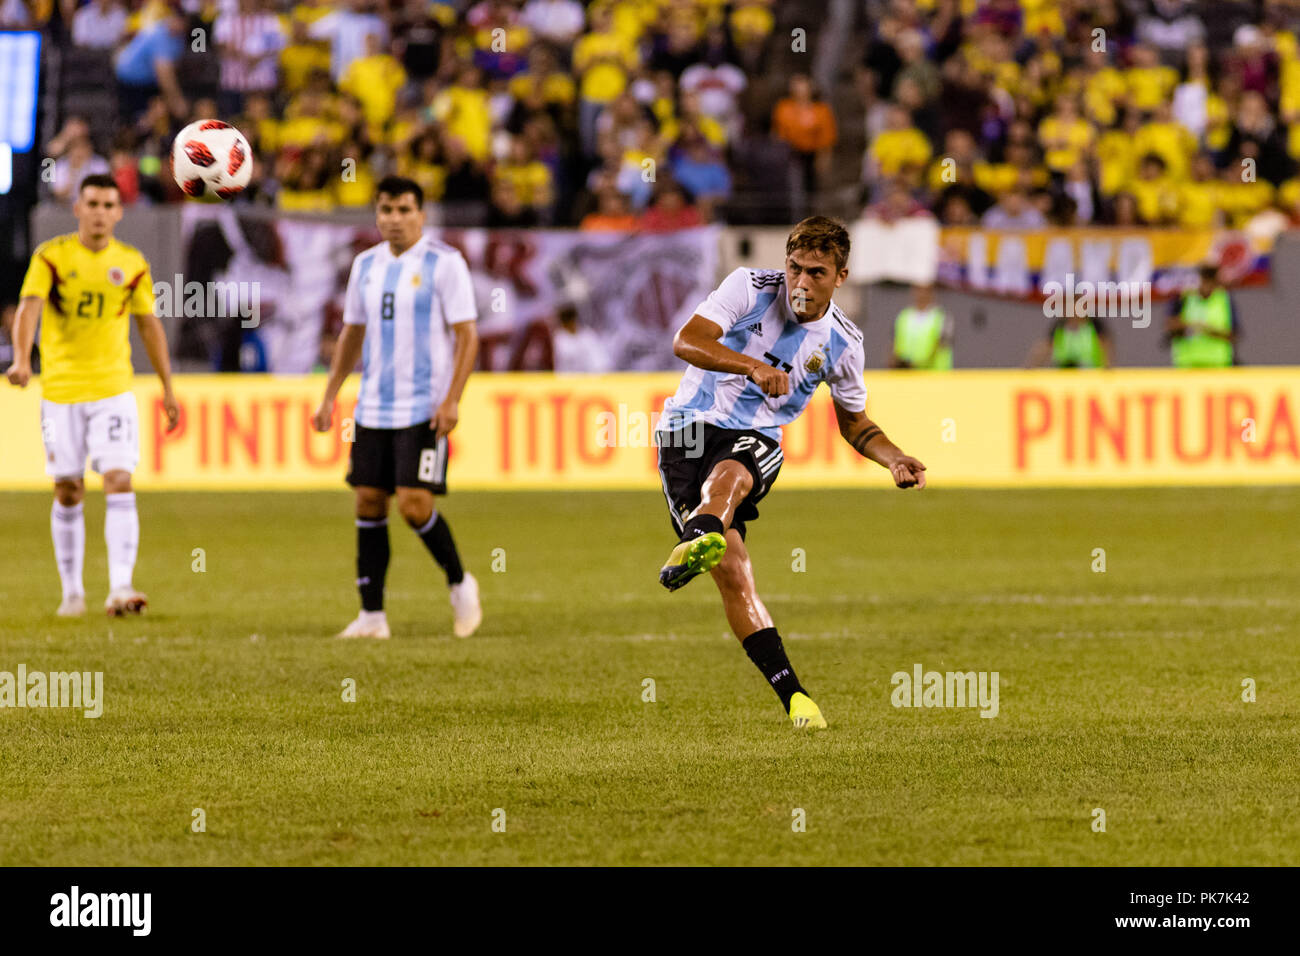 East Rutherford, NJ, USA. 11th Sept, 2018. Paulo Dybala (21) curls in a ball during the second half against Colombia at Metlife Stadium. © Ben Nichols/Alamy Live News. © Ben Nichols/Alamy Live News. Stock Photo